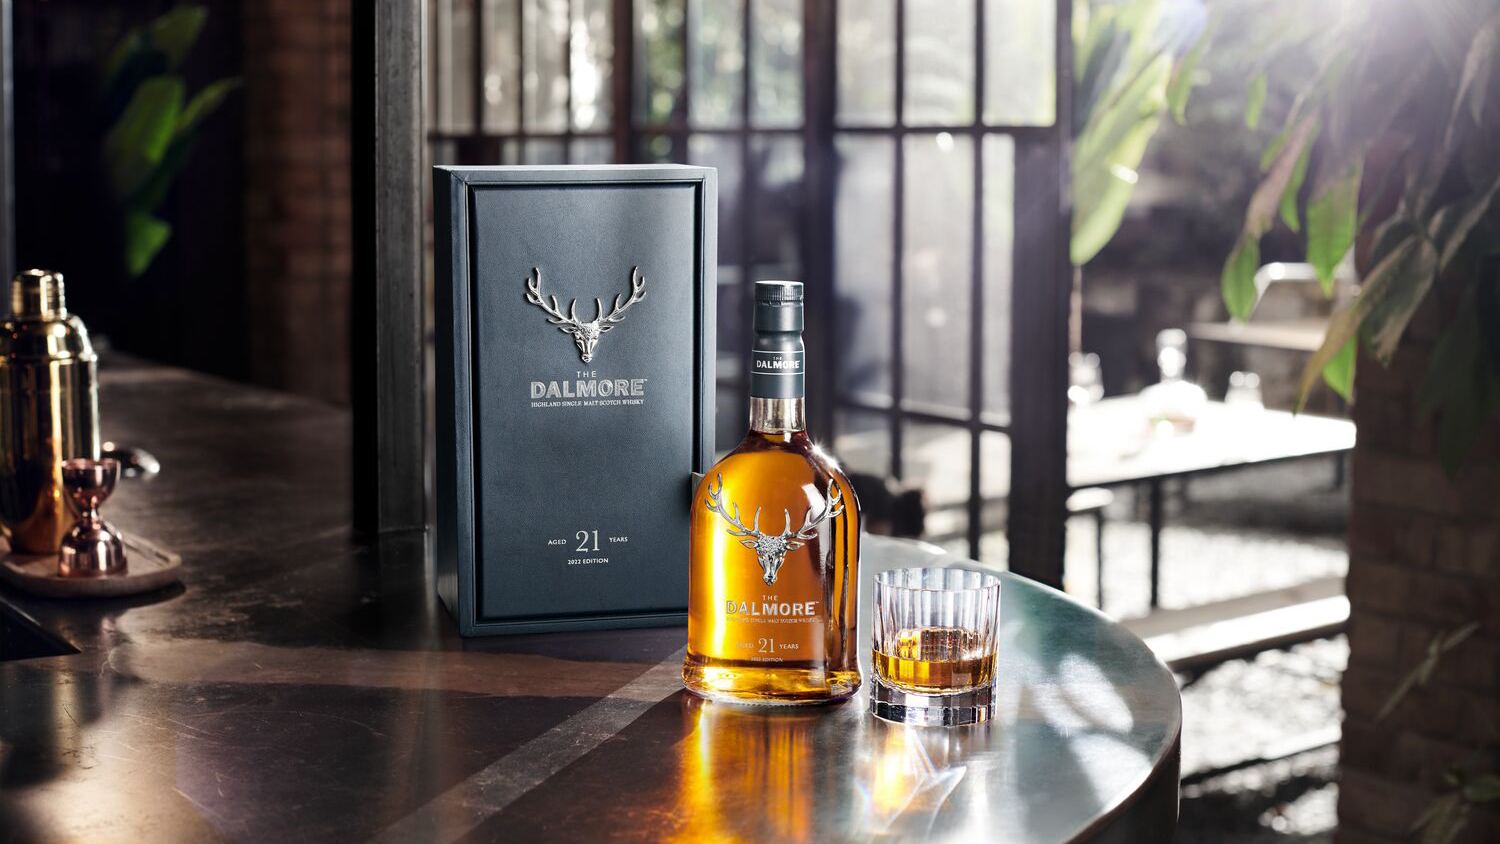 The Dalmore 21 Year Old